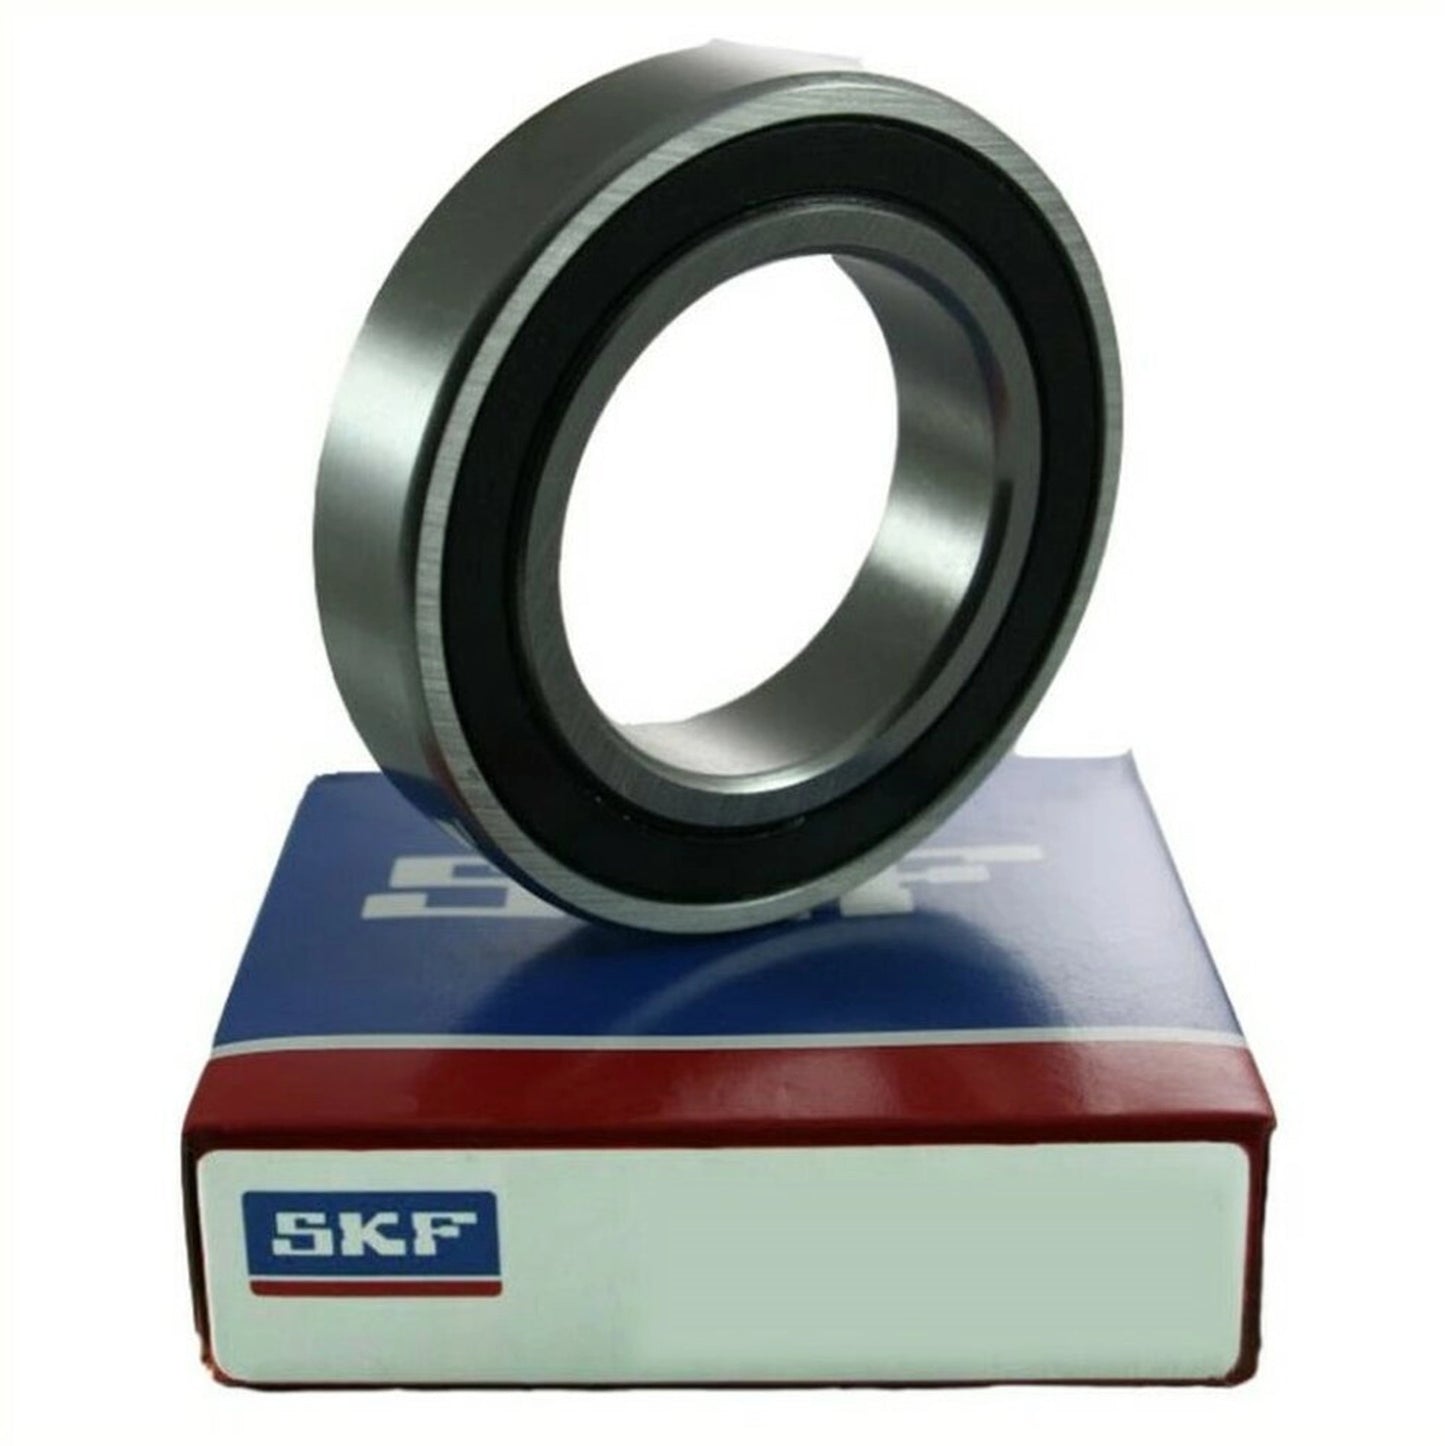 Lager 6206-RS1 / C3 30x62x16 SKF